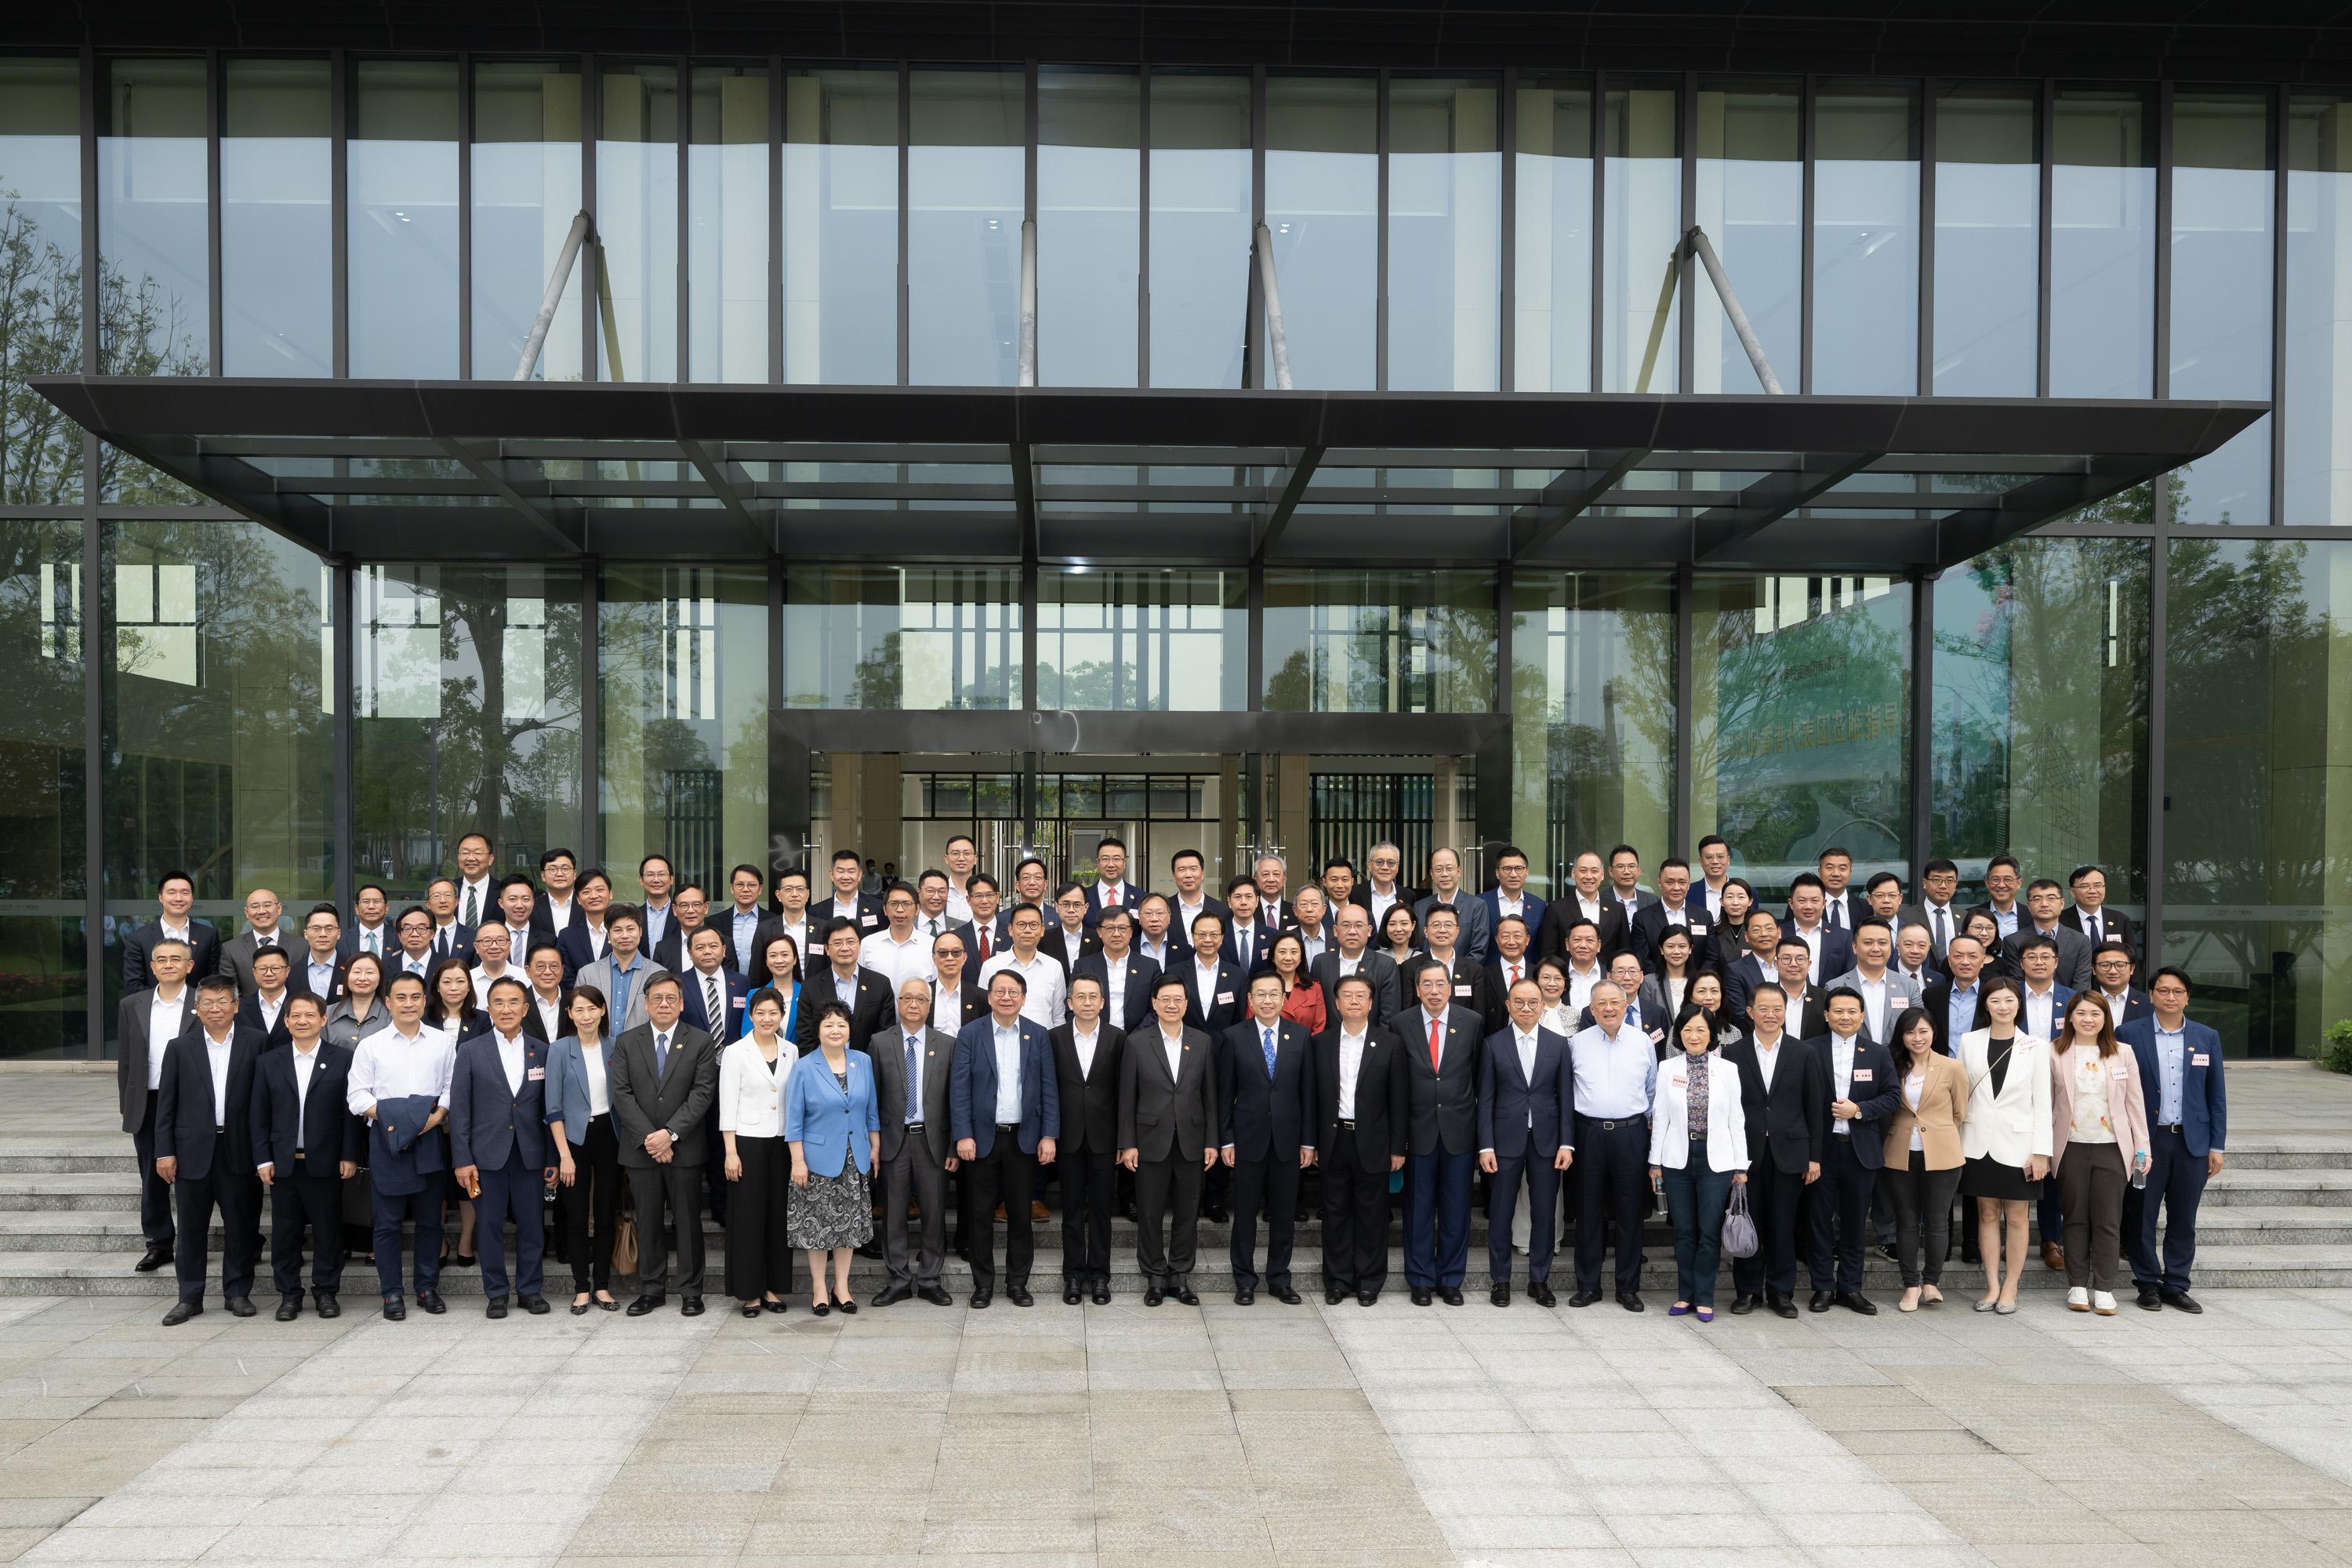 The delegation of the Government and the Legislative Council, led by the Chief Executive, Mr John Lee, concluded the four-day duty visit in the Guangdong-Hong Kong-Macao Greater Bay Area today (April 24). Photo shows the delegation taking a group photo when visiting the Lijiao Sewage Treatment Plant in Guangzhou.